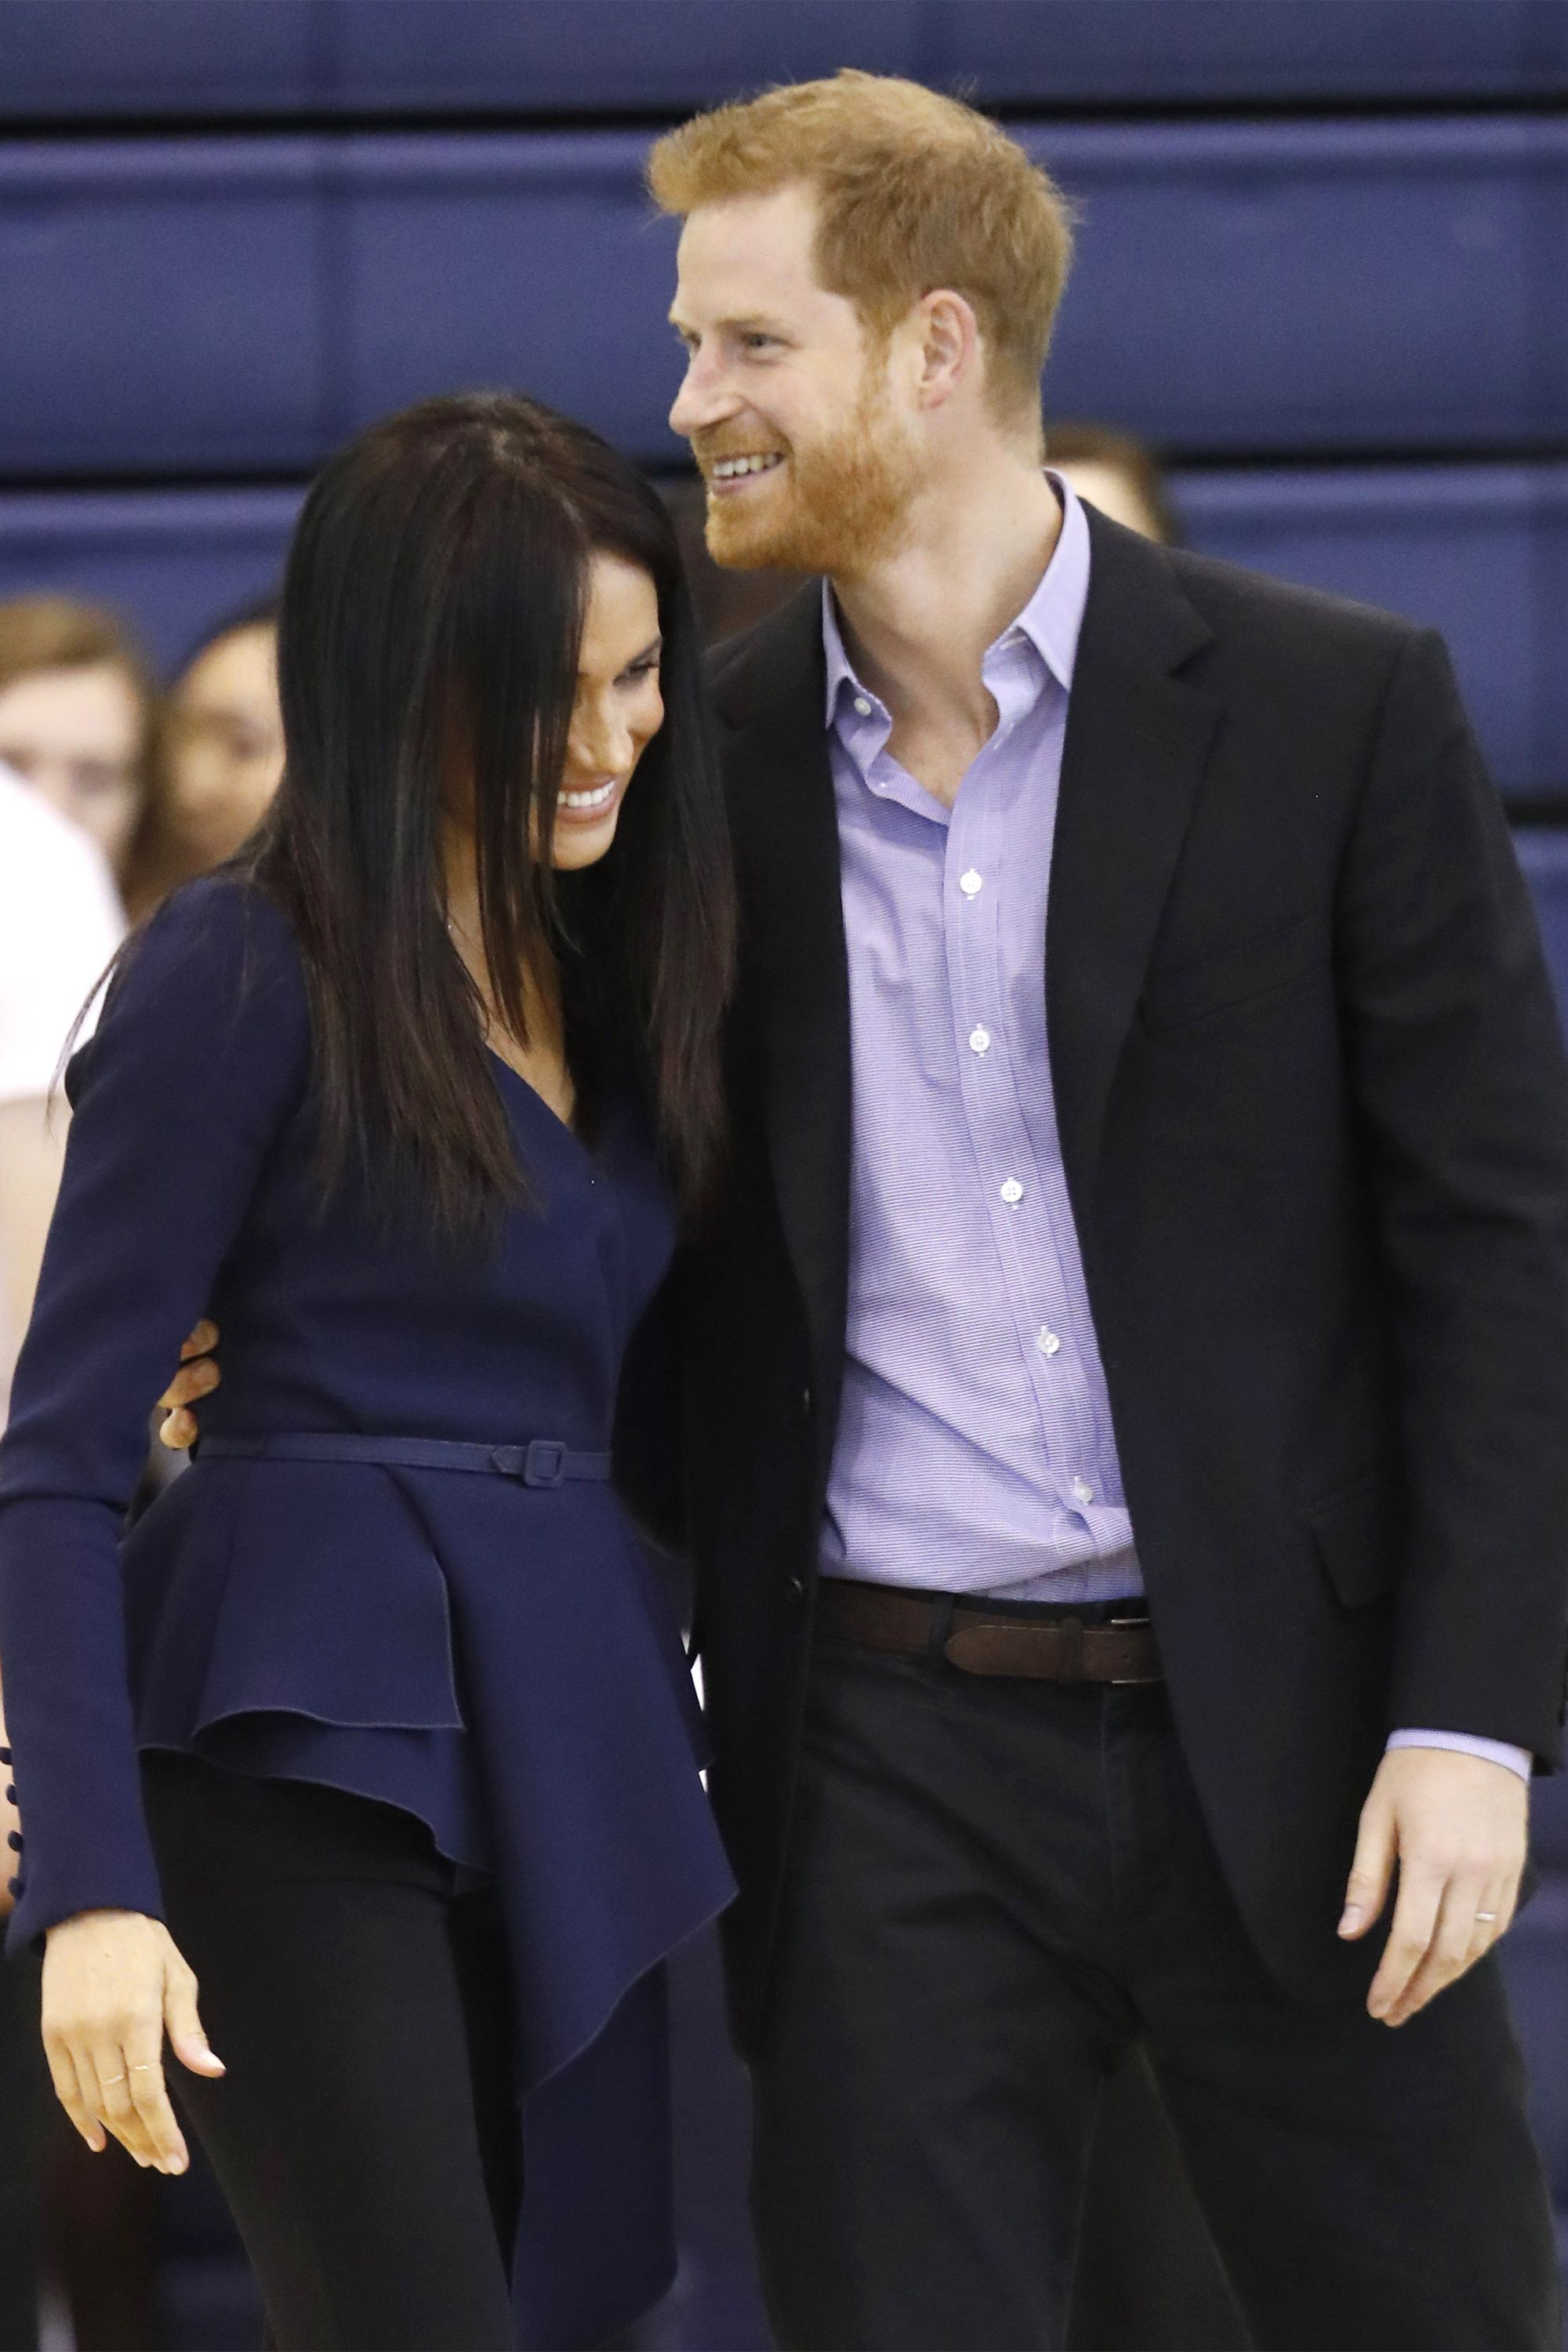 https://hips.hearstapps.com/hmg-prod.s3.amazonaws.com/images/hbz-prince-harry-meghan-markle-cute-moments-2018-09-gettyimages-1043667774.jpg?crop=1xw:1xh;center,top